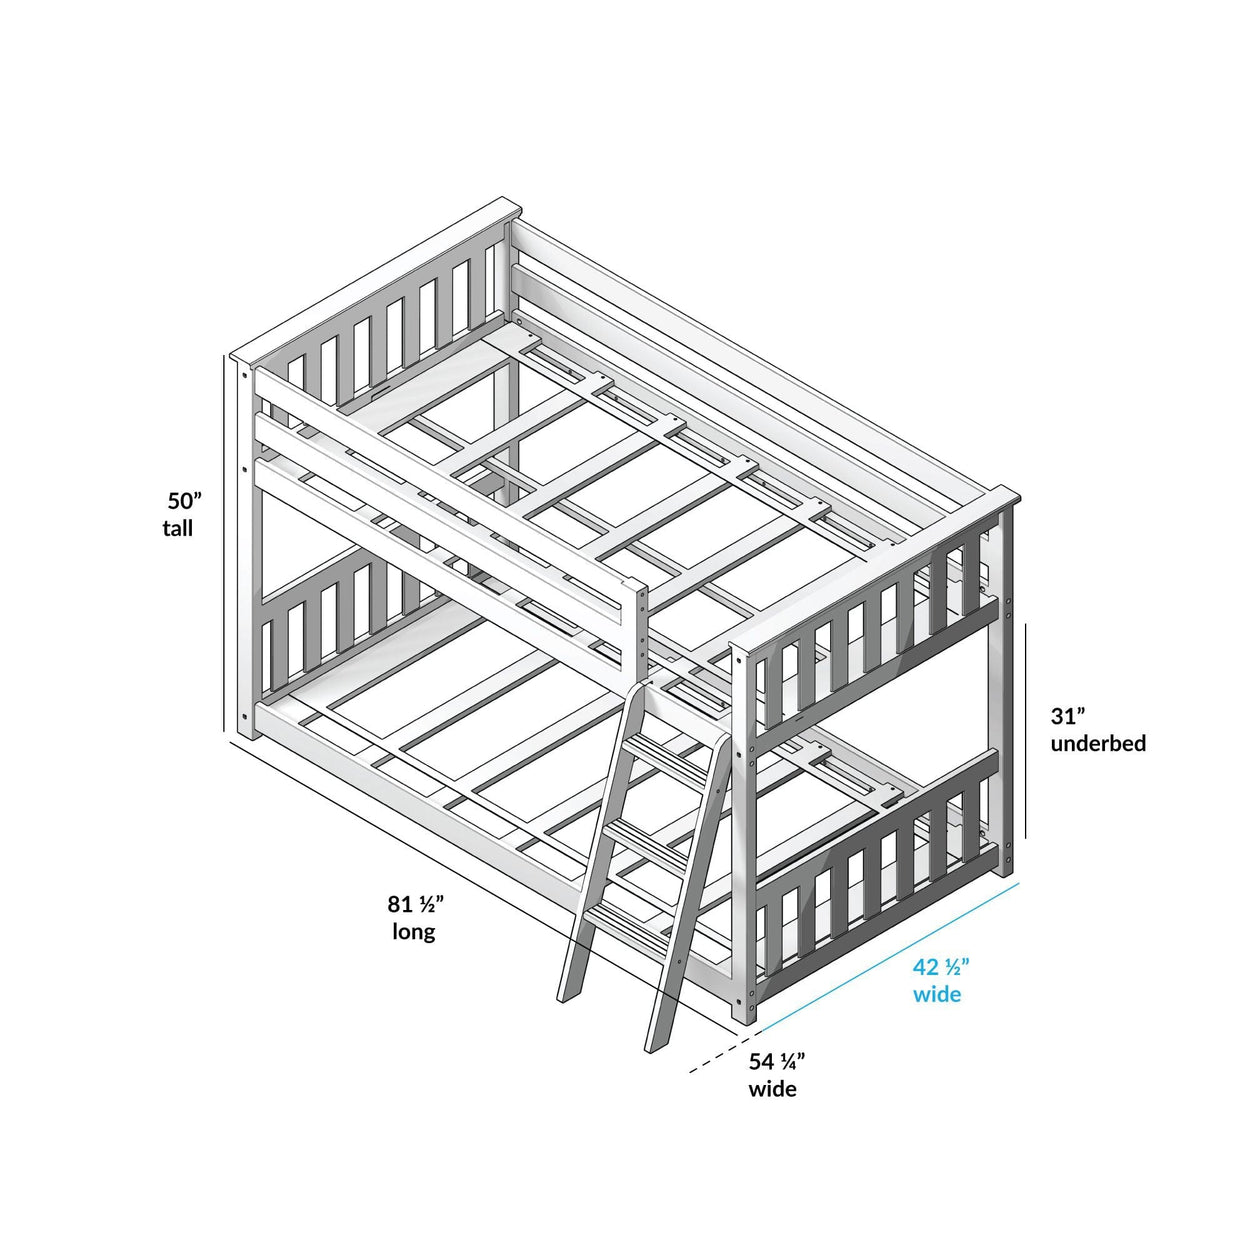 180214002209 : Bunk Beds Twin over Twin Low Bunk with Two Guard Rails, White